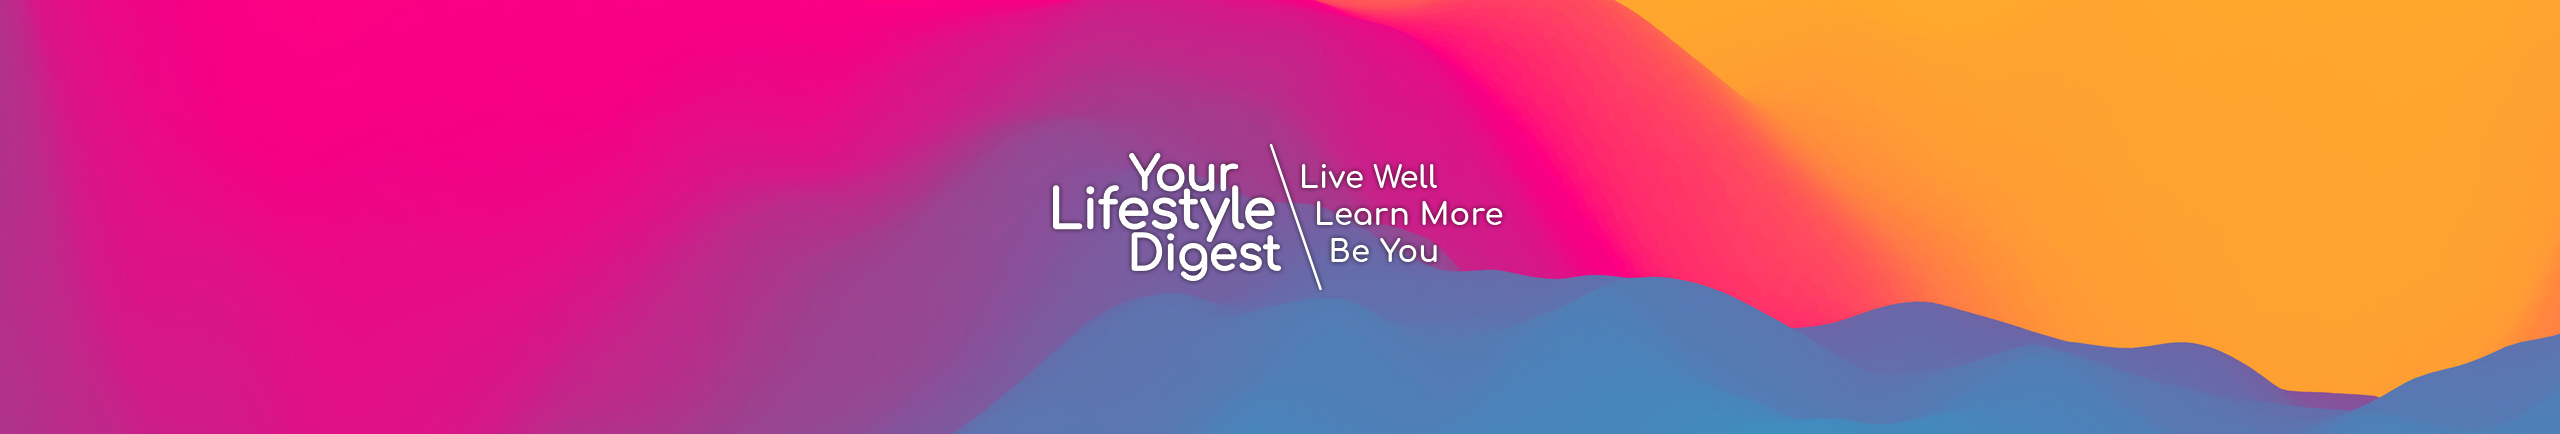 Your Lifestyle Digest: Live Well. Learn More. Be You.